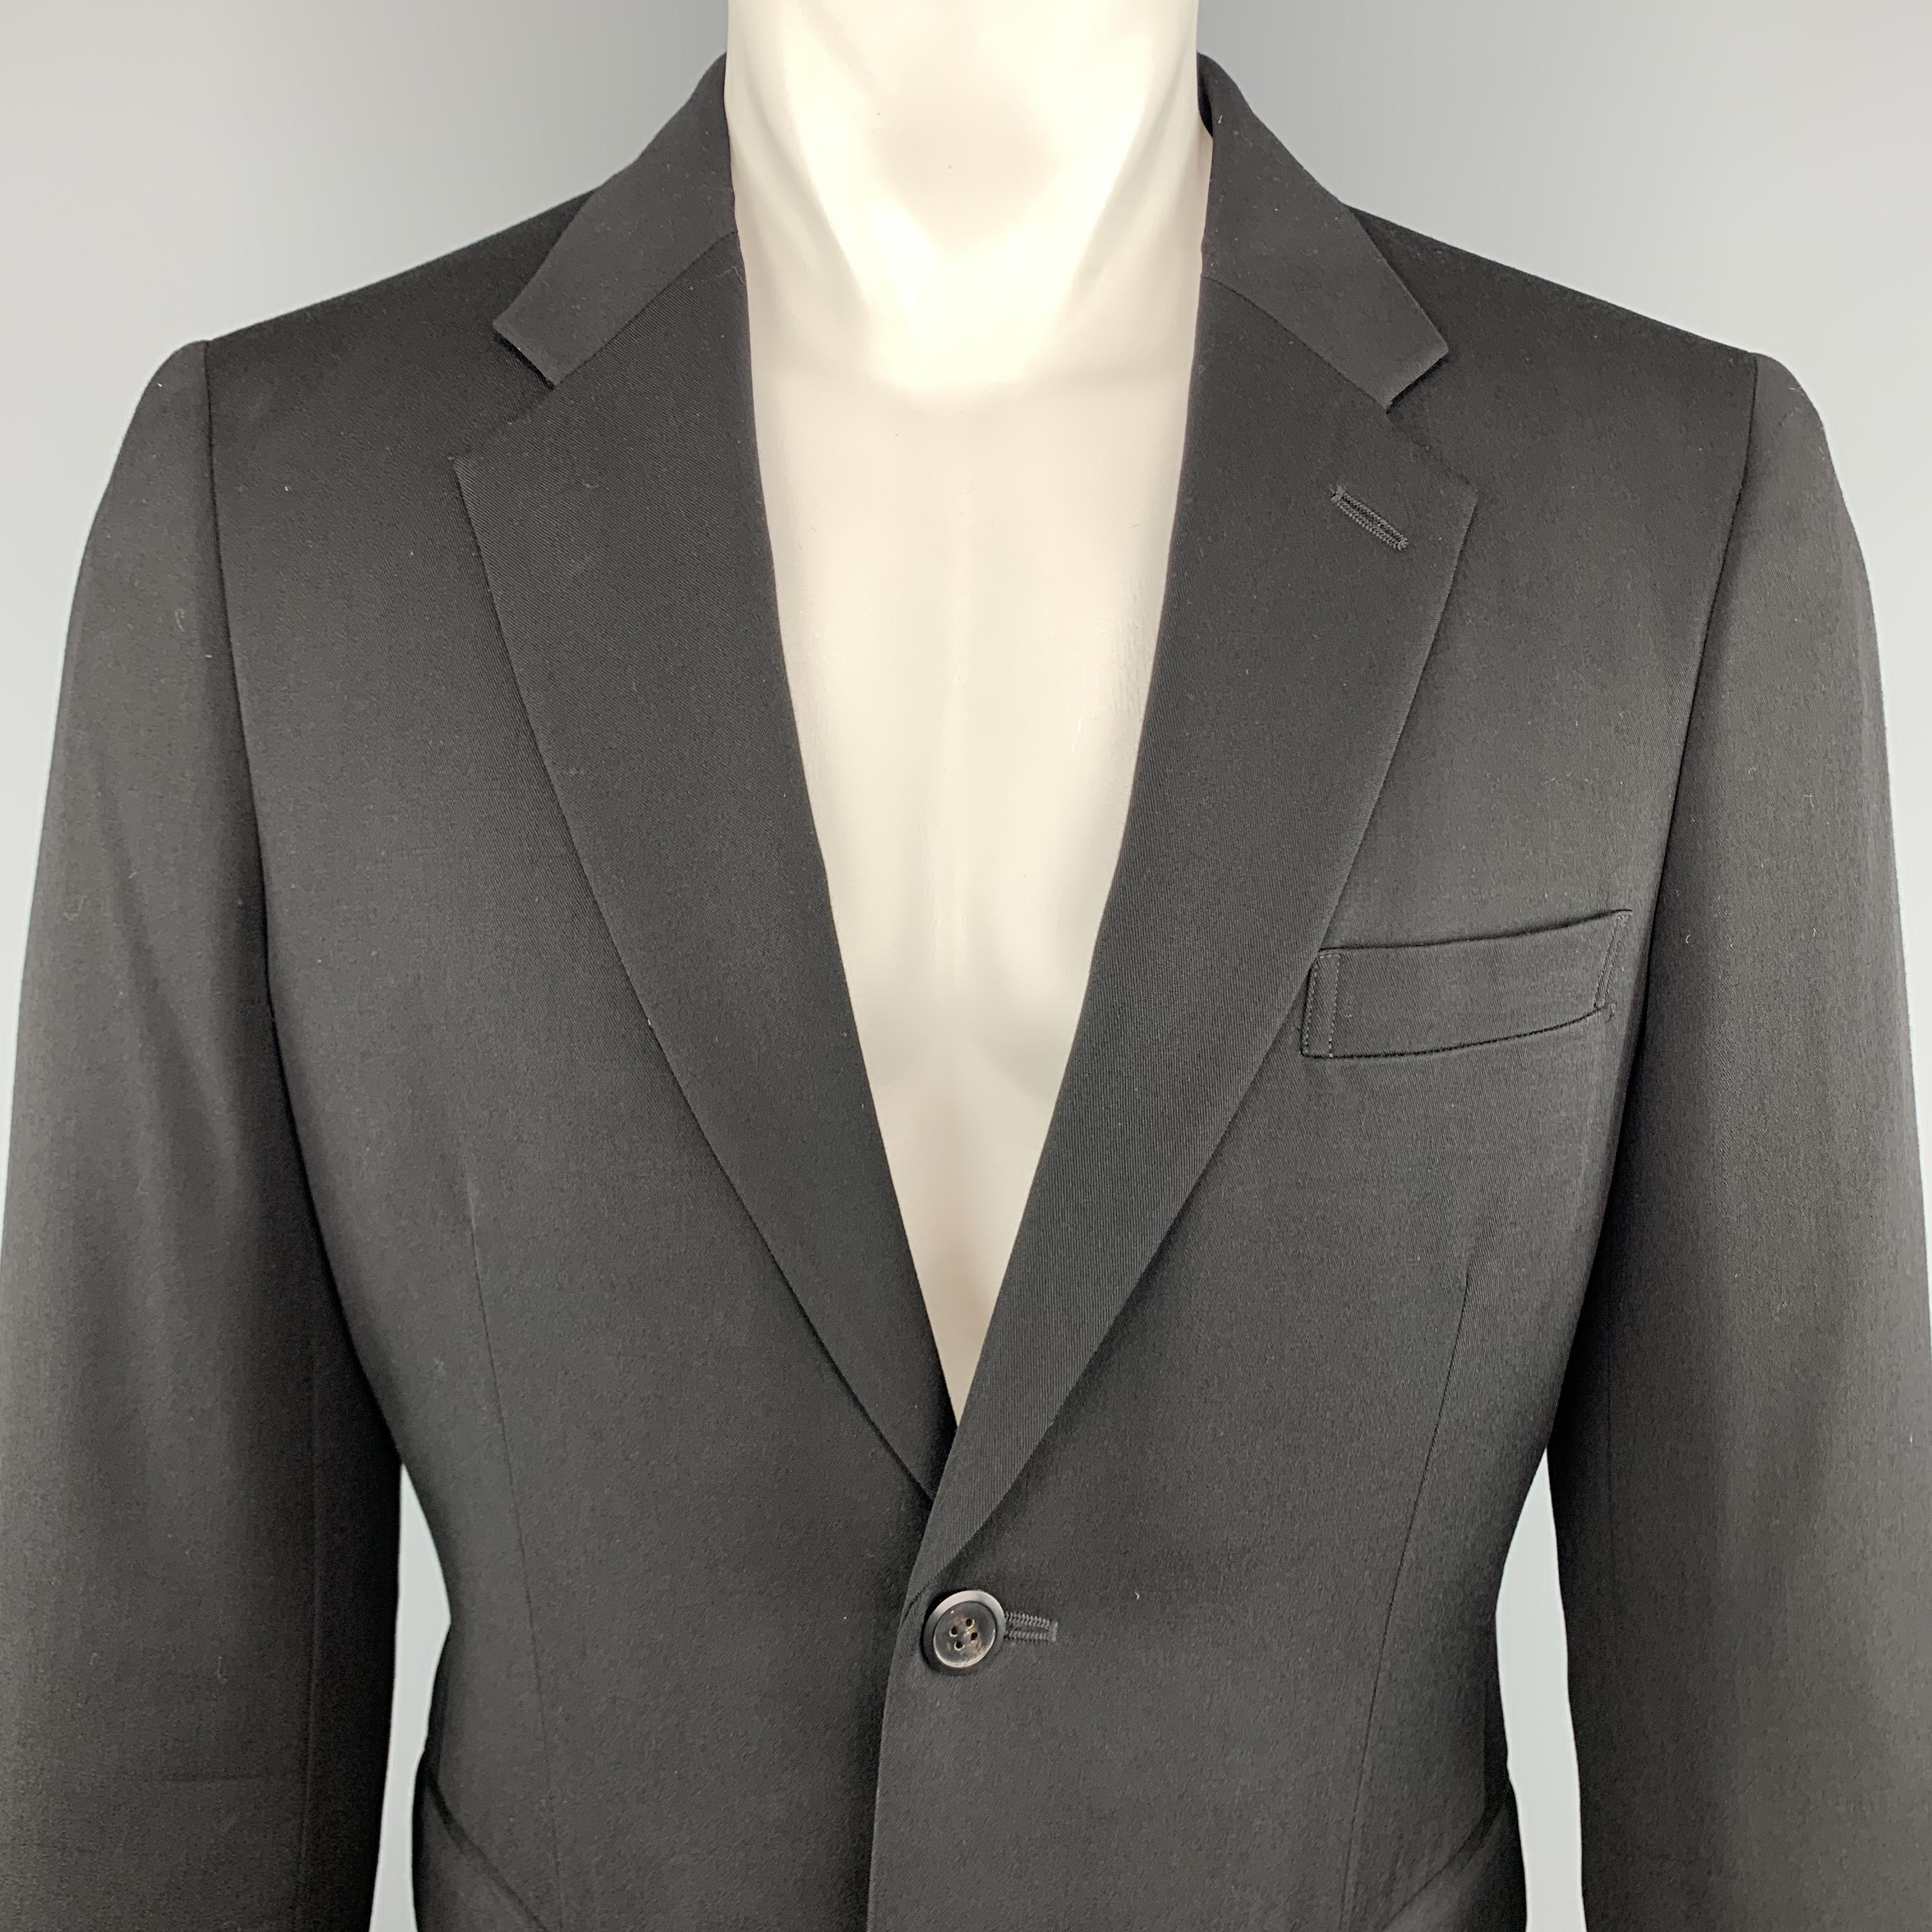 COMME des GARCONS HOMME PLUS sport coat jacket comes in black wool with a notch lapel, two button single breasted front, and raw edge deconstructed cut out hem line. Made in Japan.
 
Excellent Pre-Owned Condition.
Marked: M  AD2015
 
Measurements:
